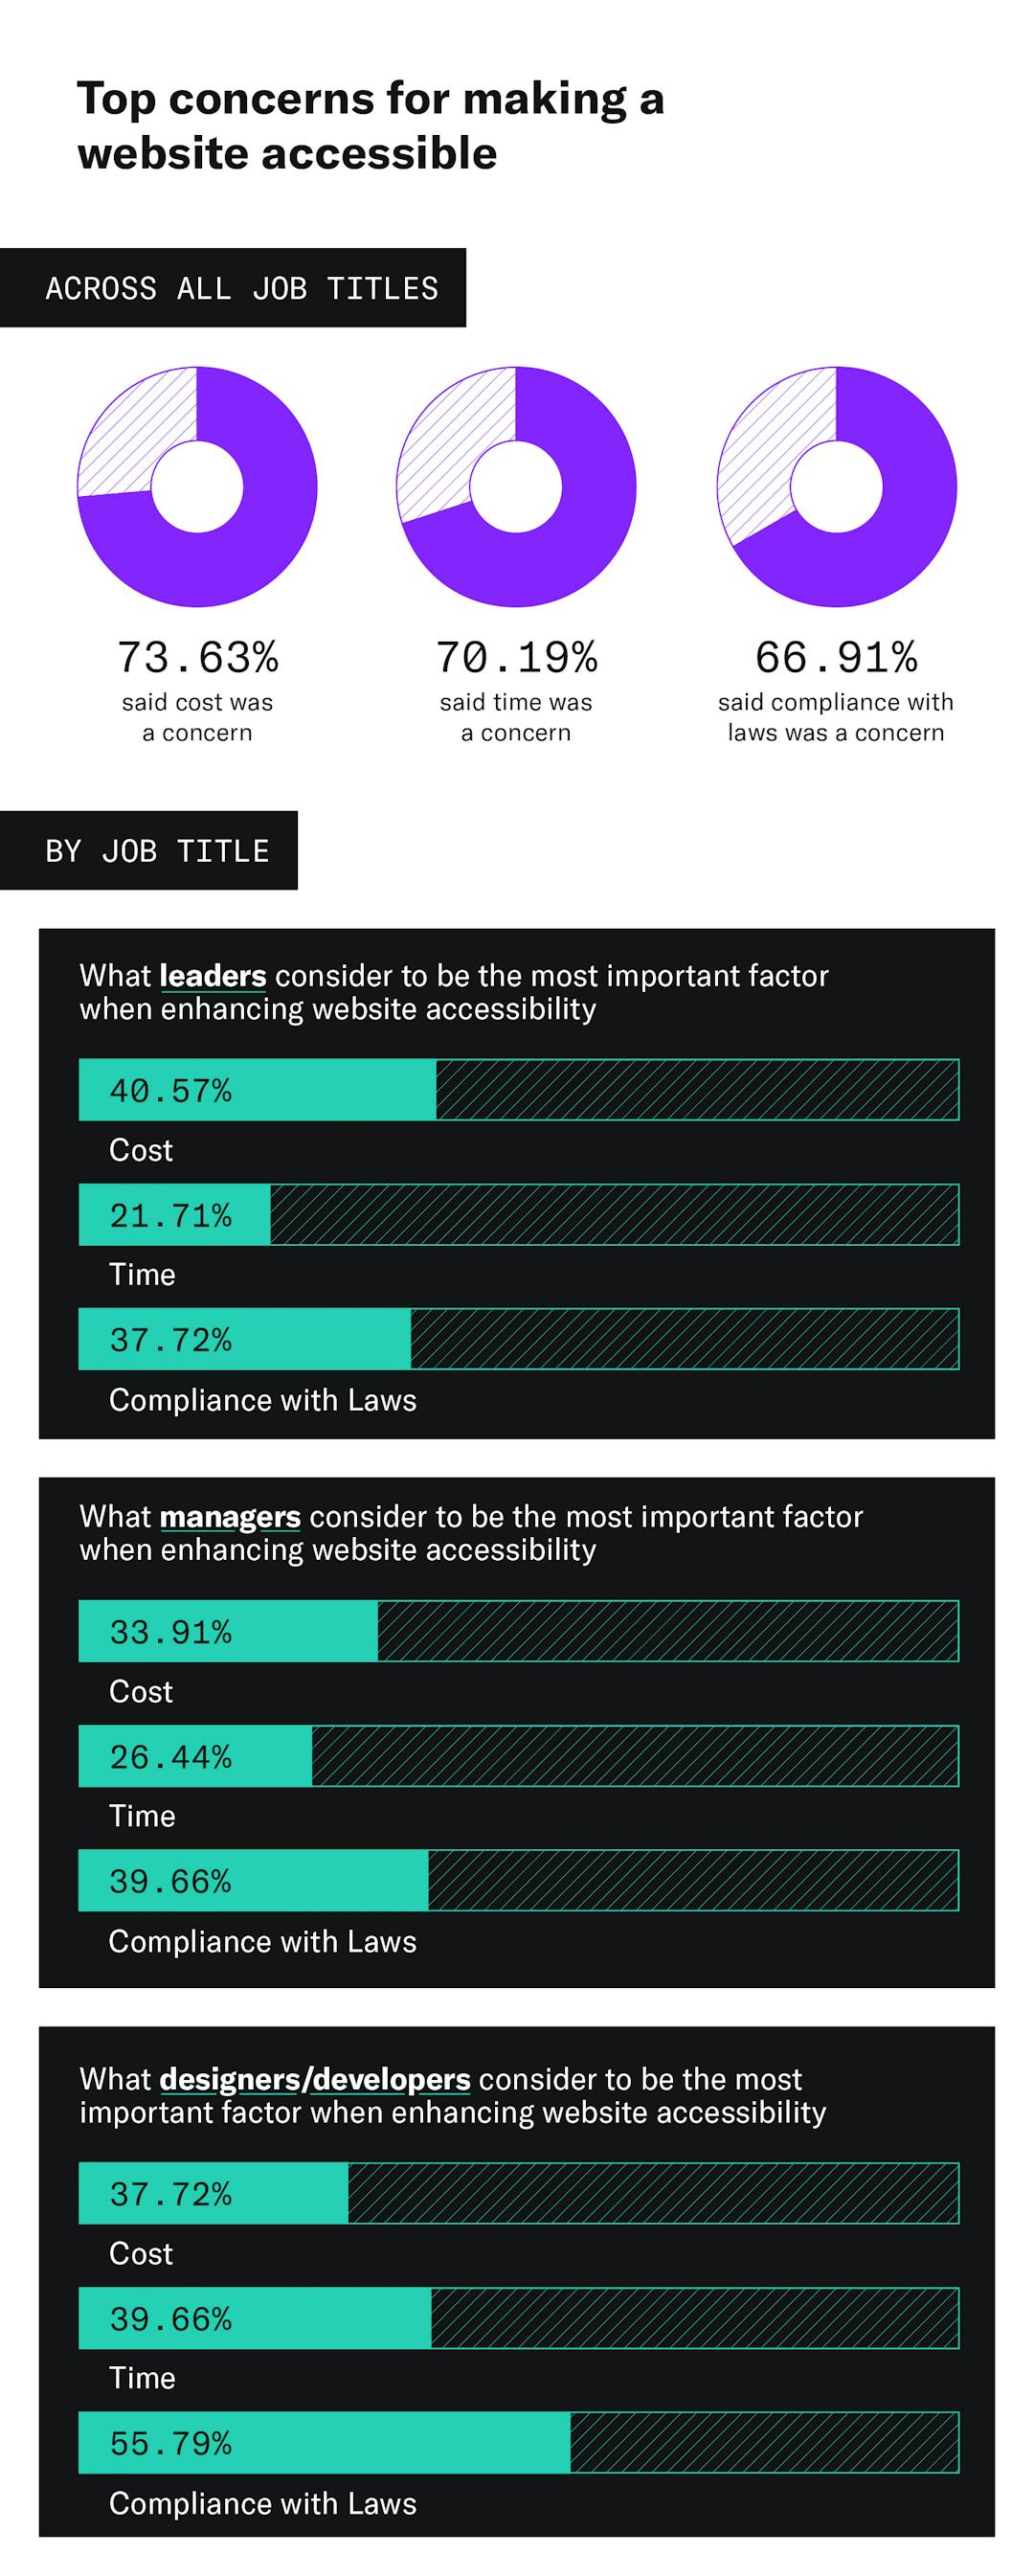 An infographic depicting the top concerns for making a website accessible between time, cost, and compliance with laws for leaders, managers, and designers/developers. Cost is the biggest concern for 40.57% of leaders. Compliance with laws is the biggest concern for 39.66% of managers and 55.79% of designers/developers.